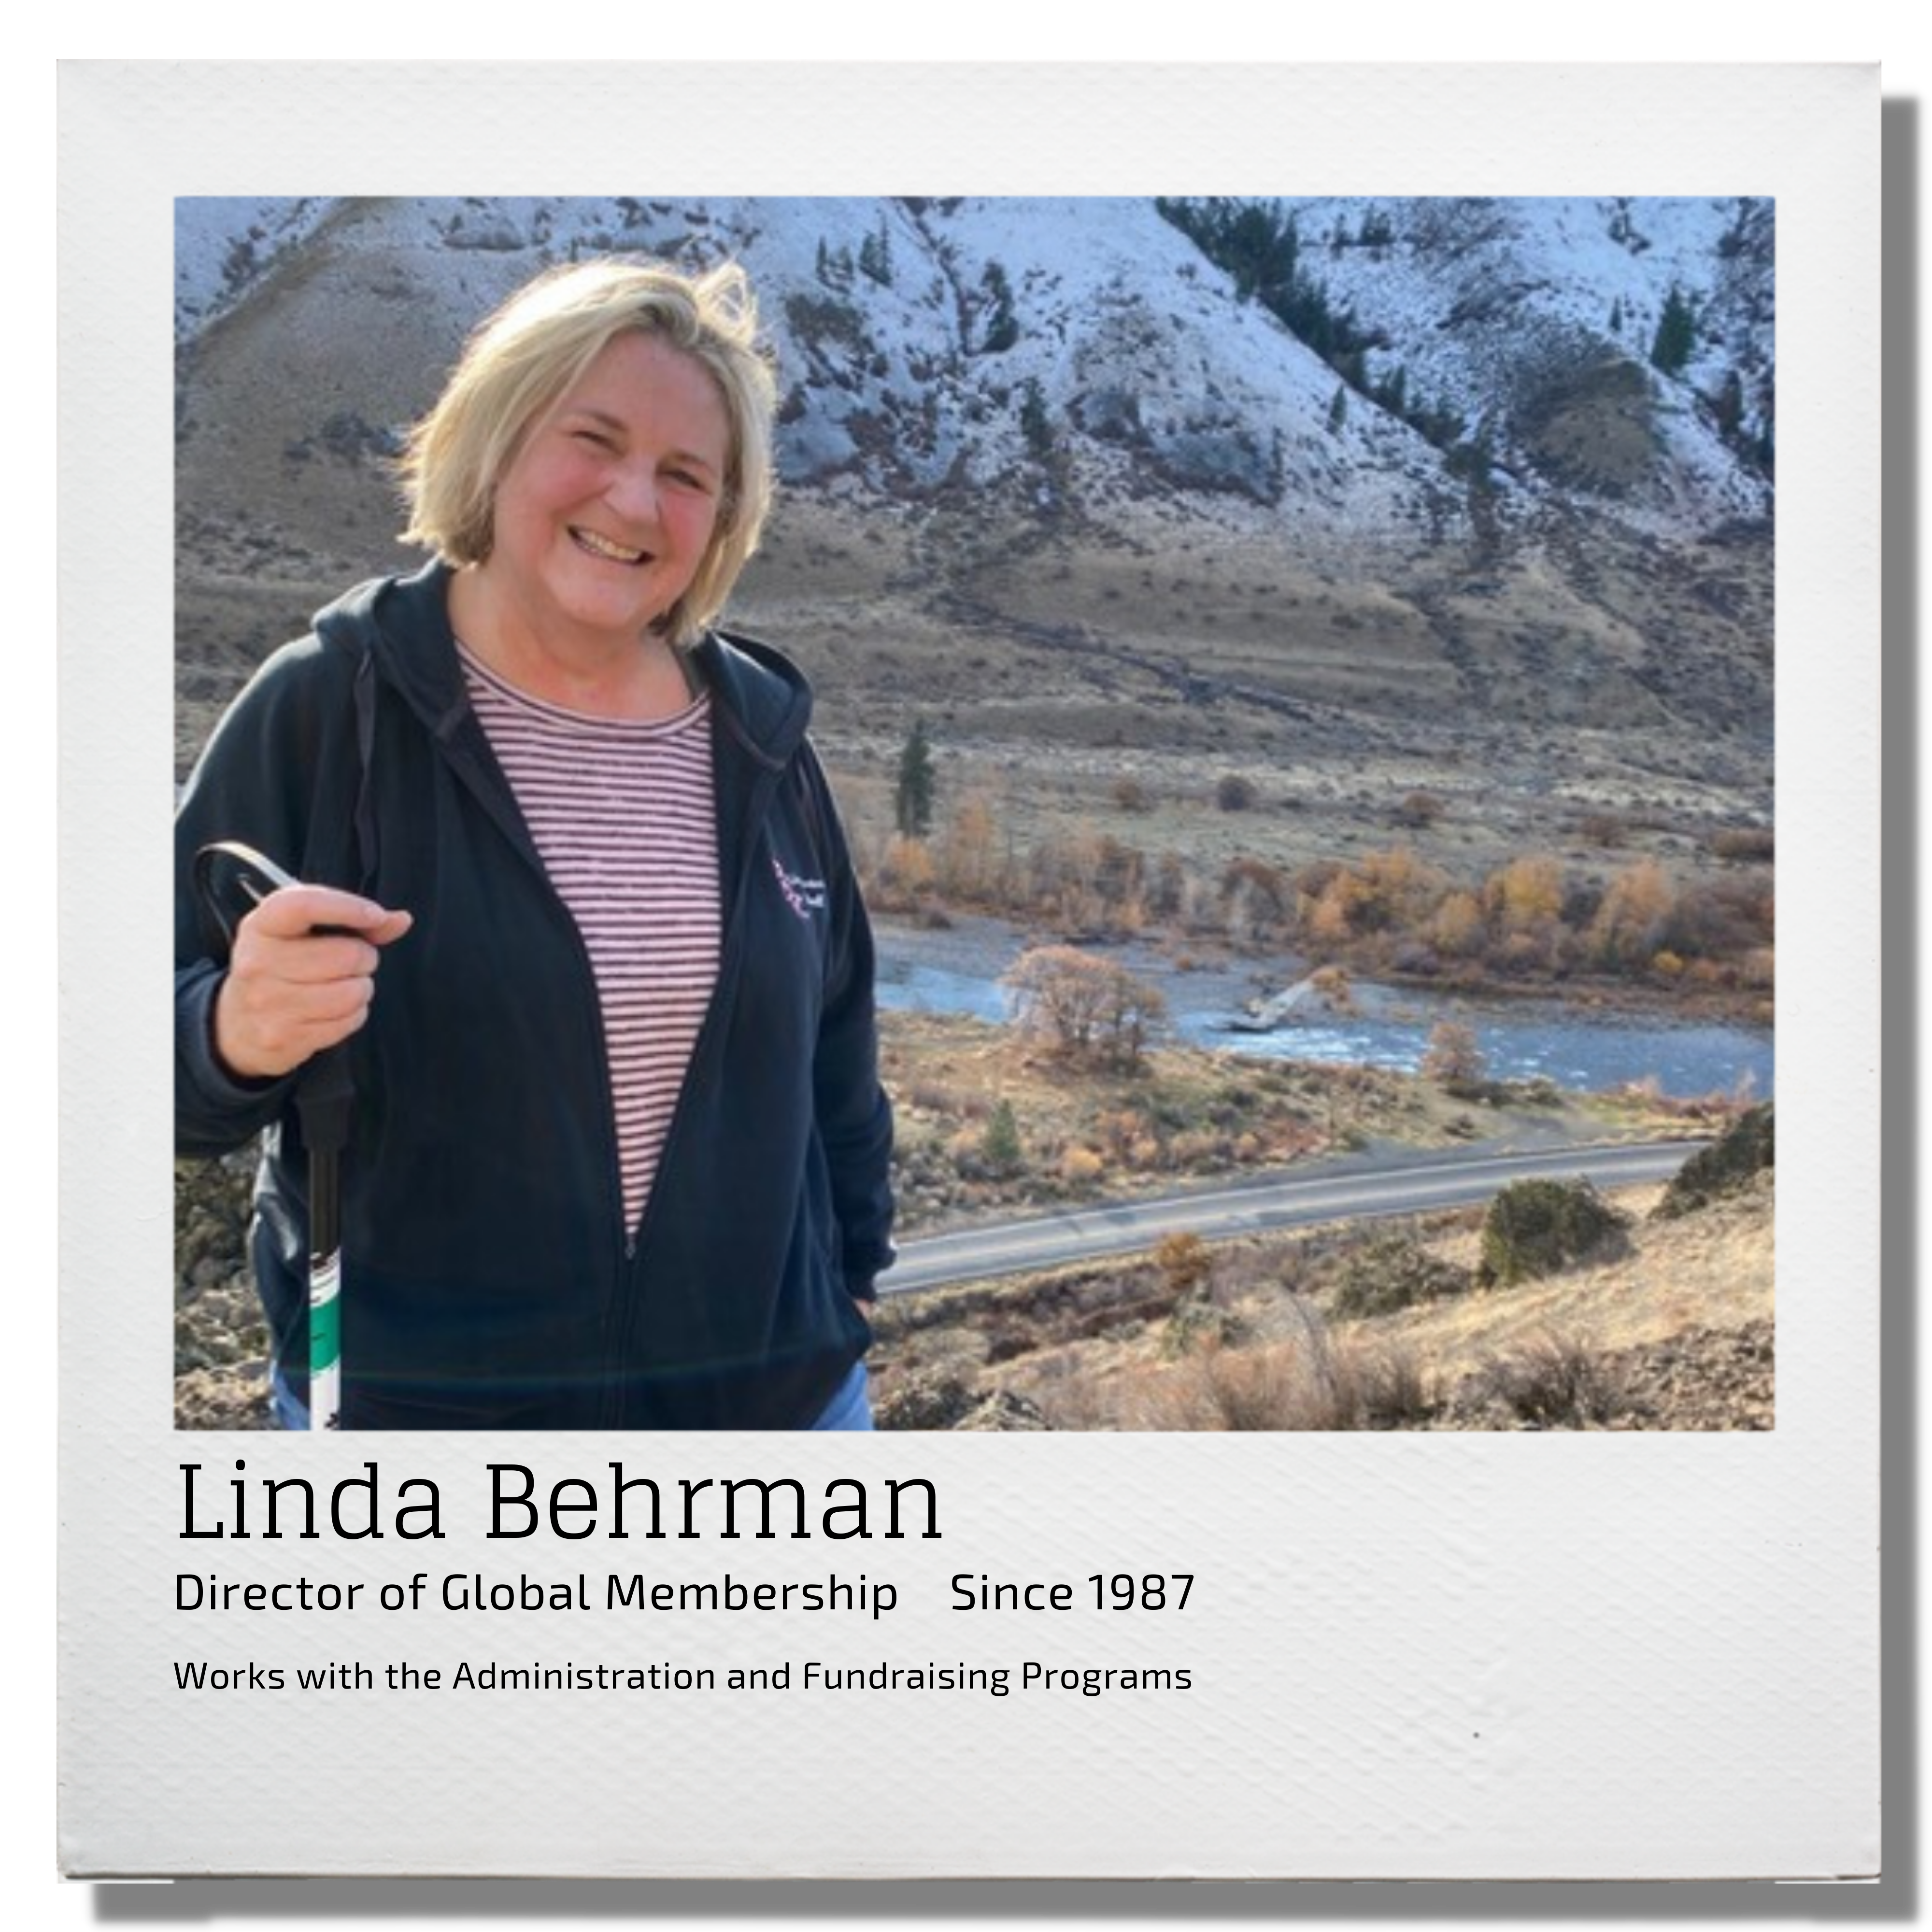 Linda Behrman Director of Global Membership since 1987, Works with Administration and Fundraising Programs